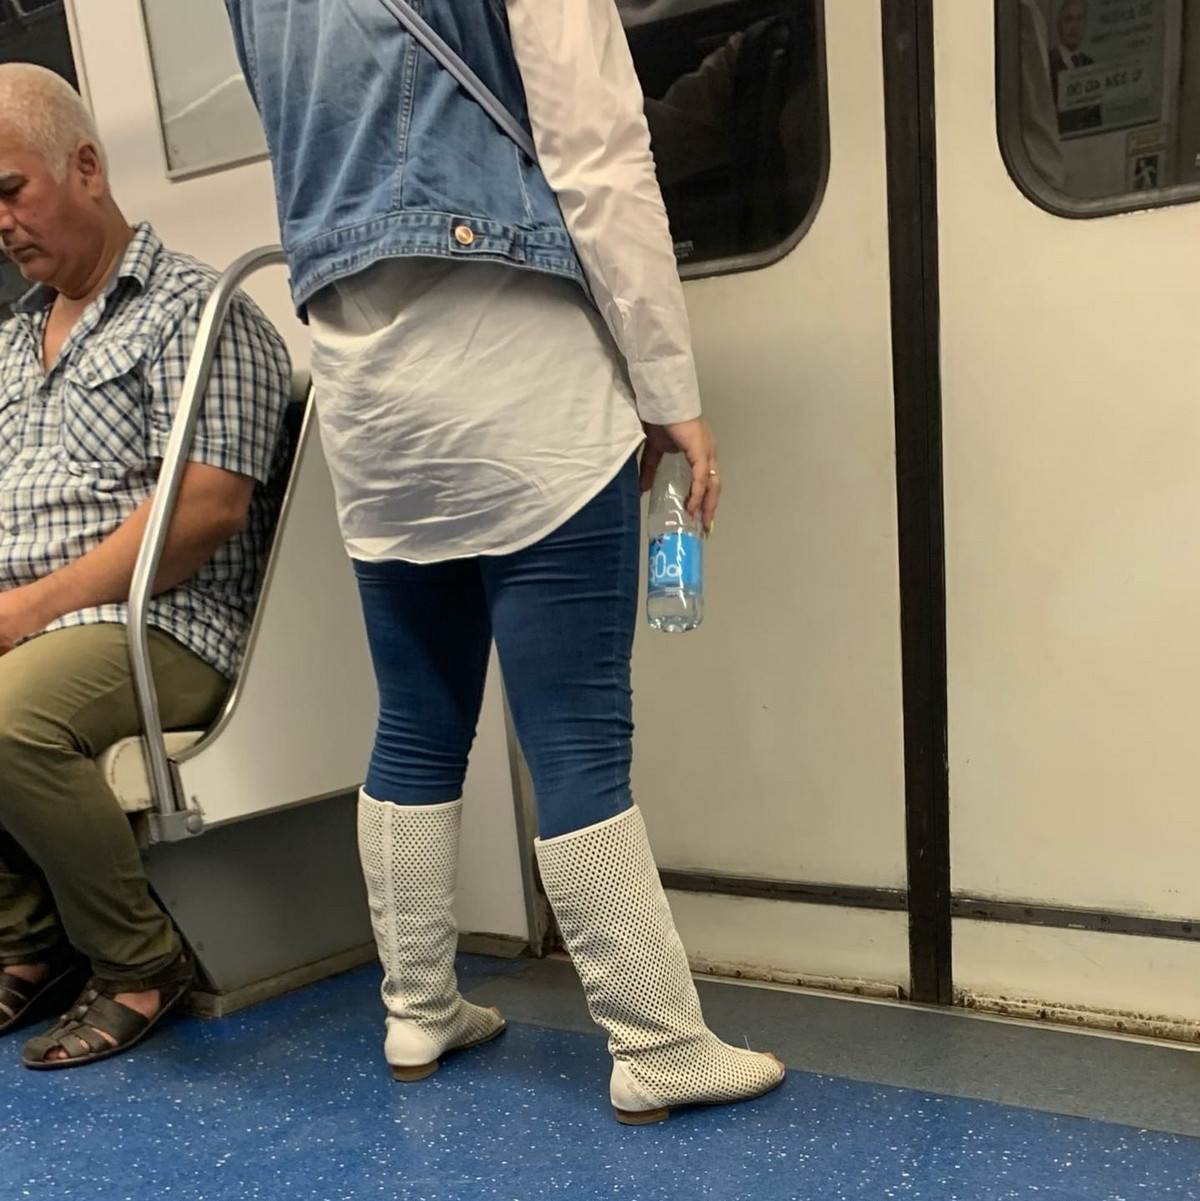 Strange People In The Subway, part 14